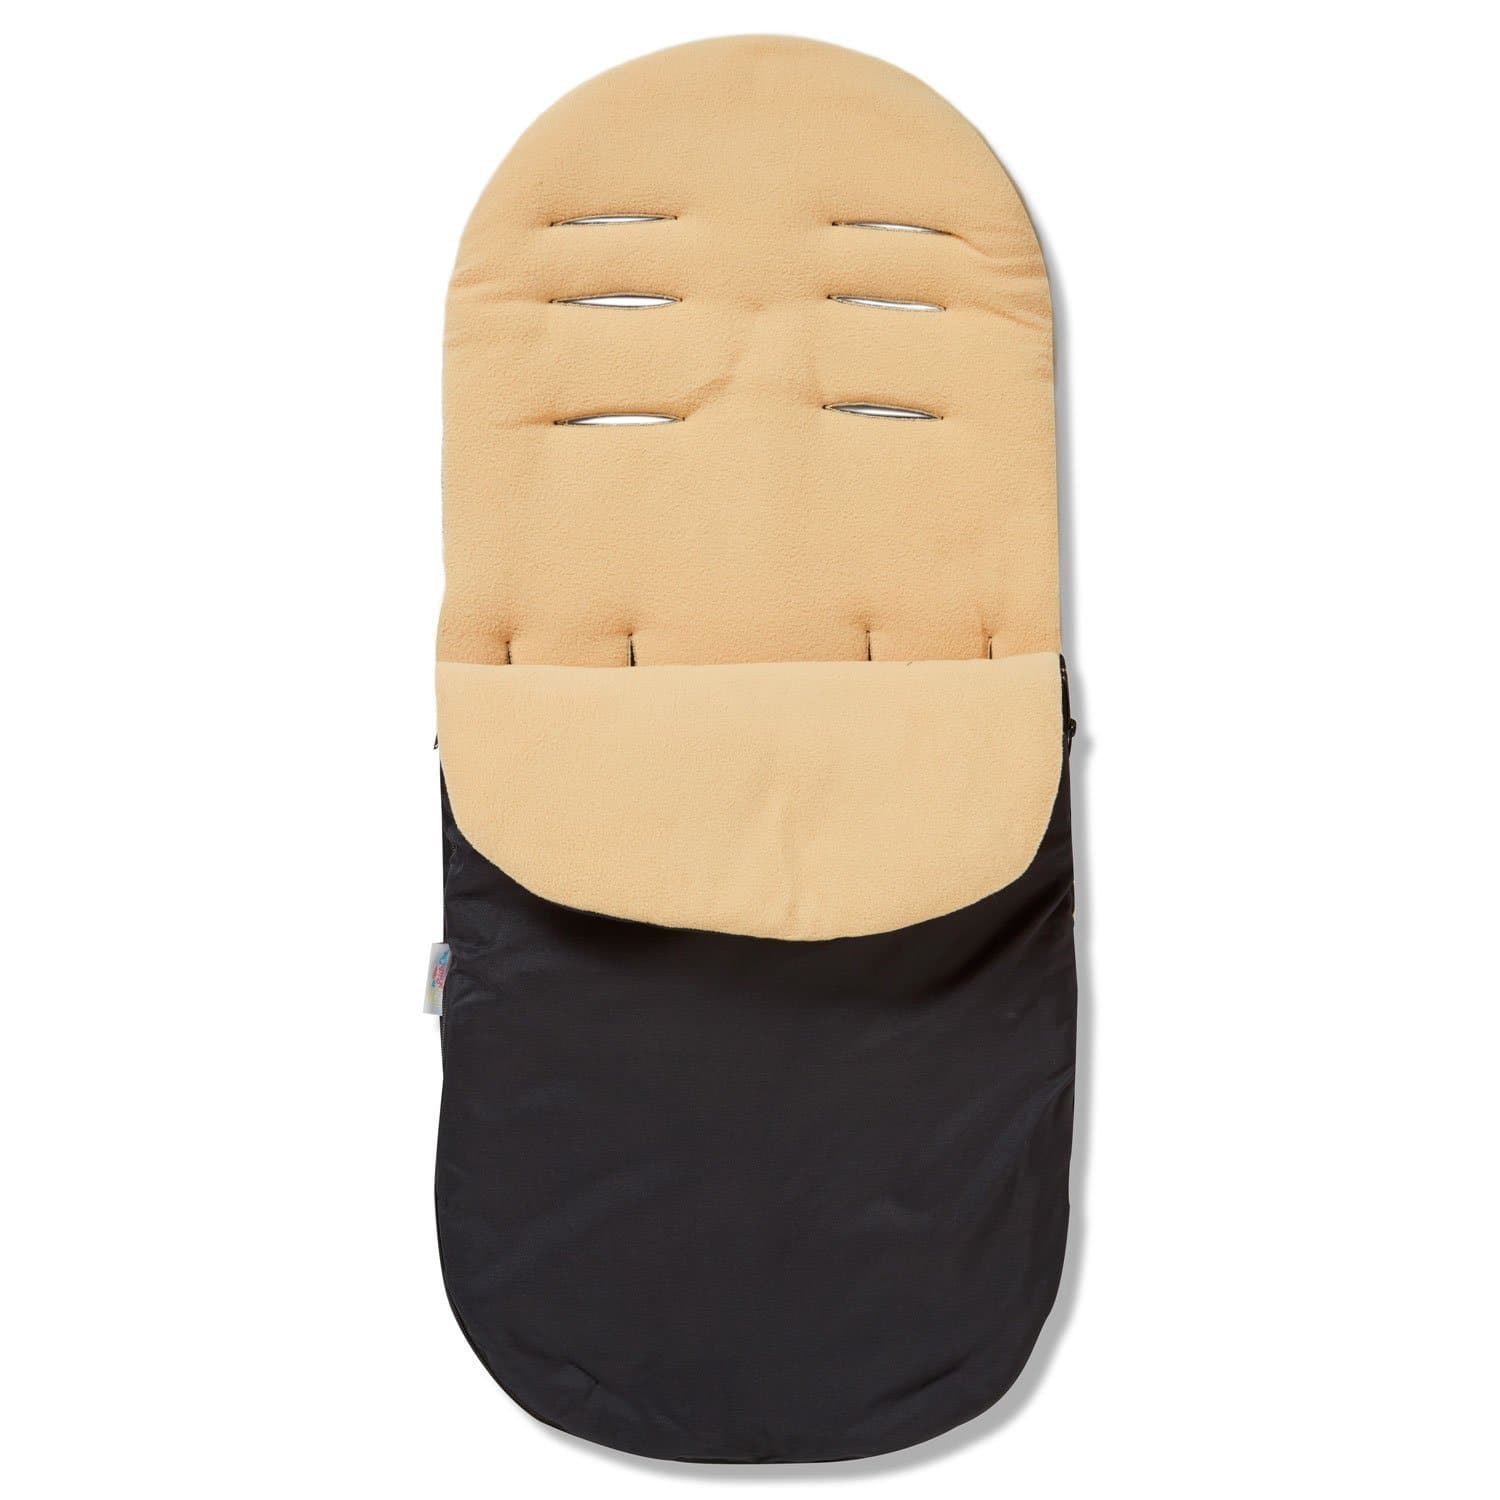 Footmuff / Cosy Toes Compatible with Looping - Sand / Fits All Models | For Your Little One